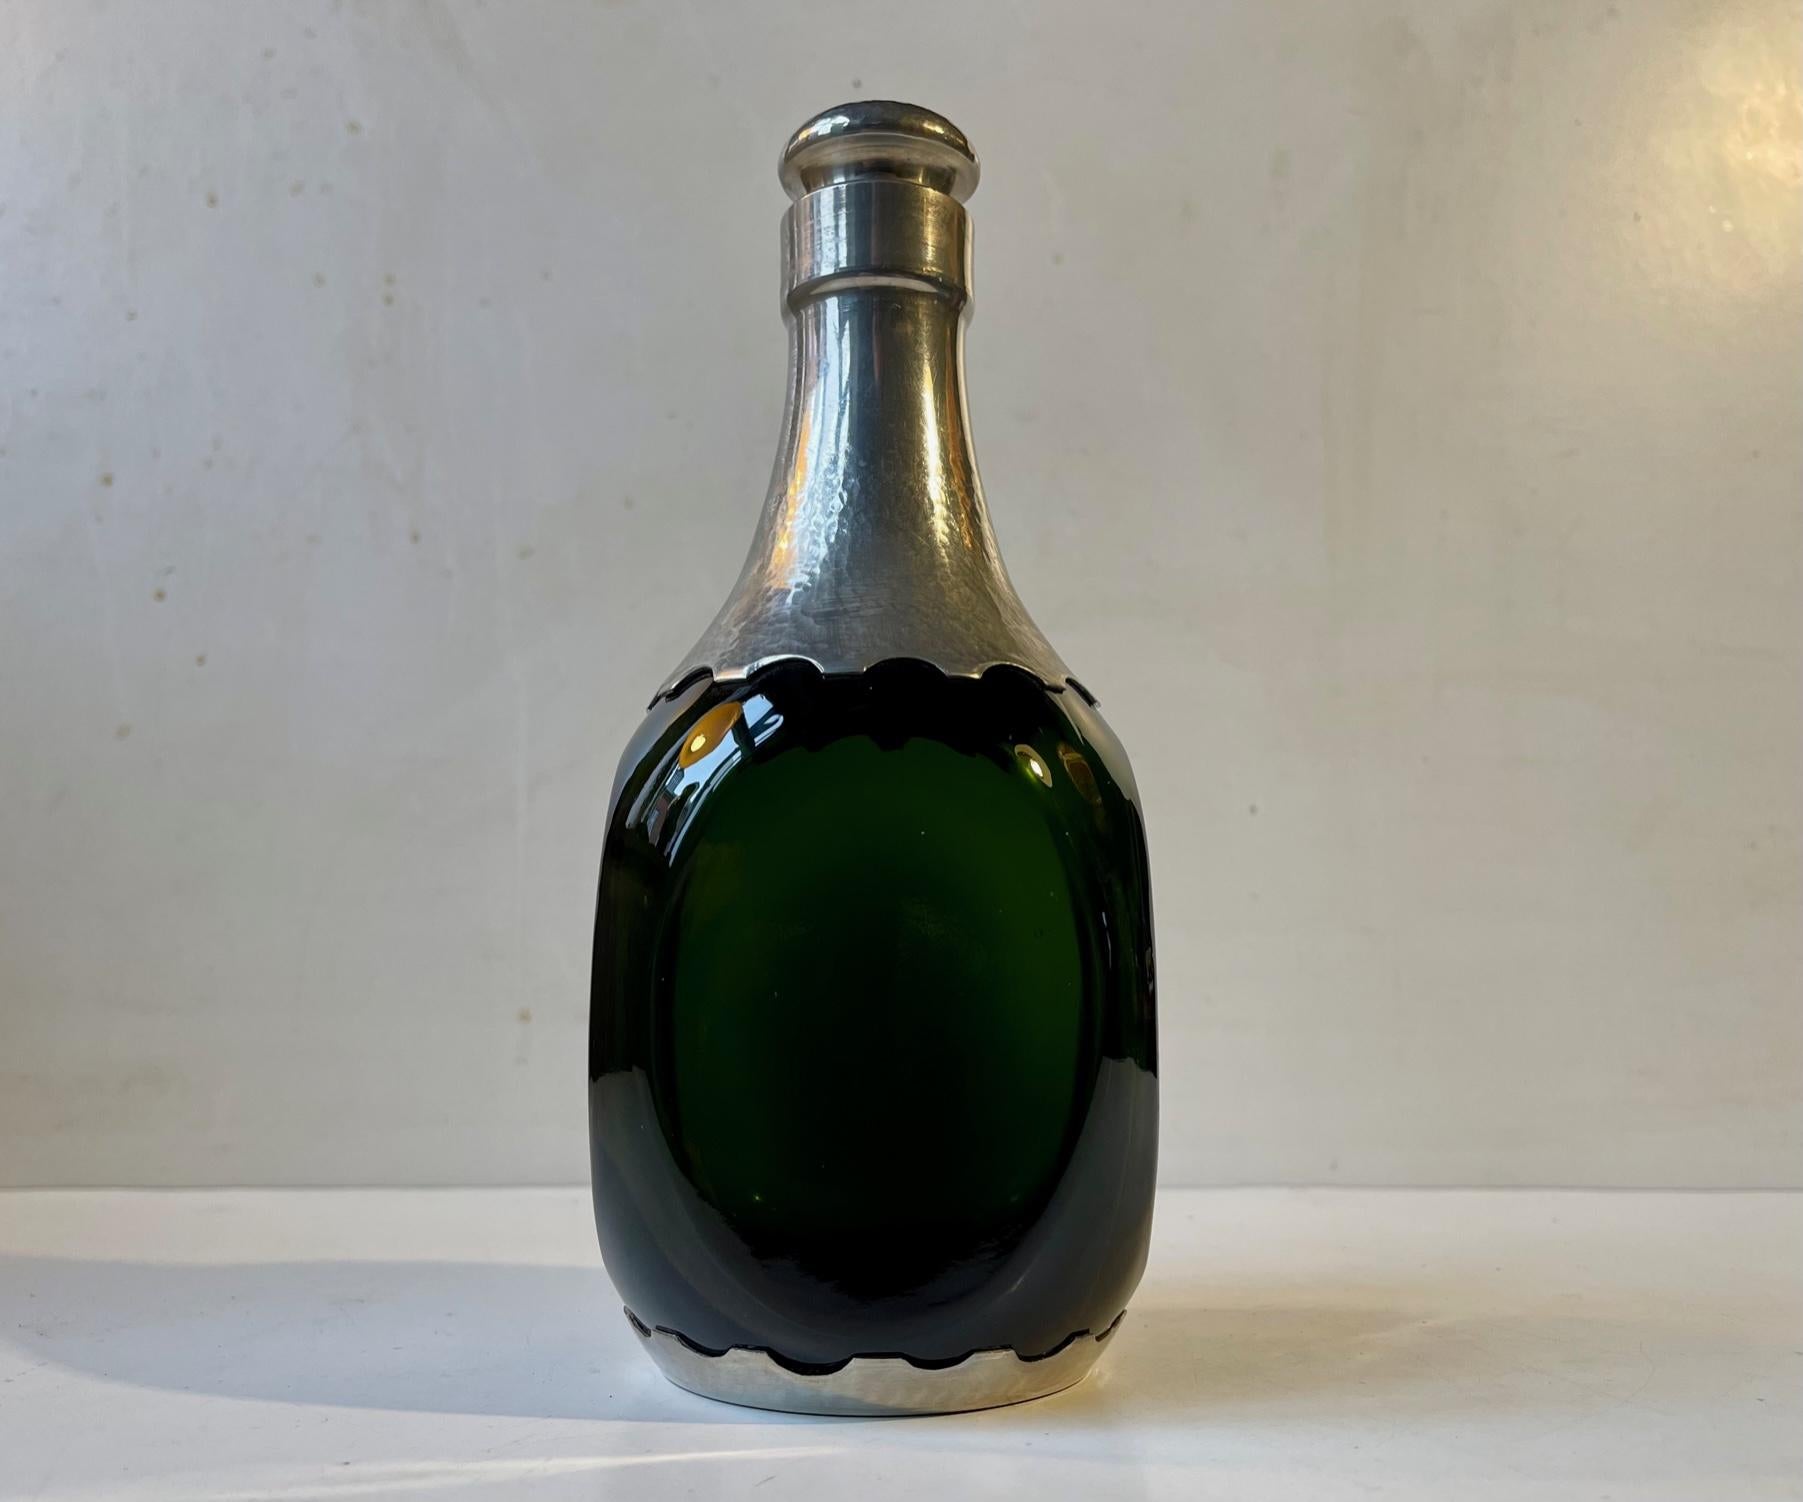 A rare beautiful decanter in green hand-blown glass. Decorated with hand-set/fitted with panels of hammered pewter. Original stopper in pewter and cork. Distinct Danish Jugendstil - art nouveau styling reminiscent of Thorvald Bindesbøll and Mogens